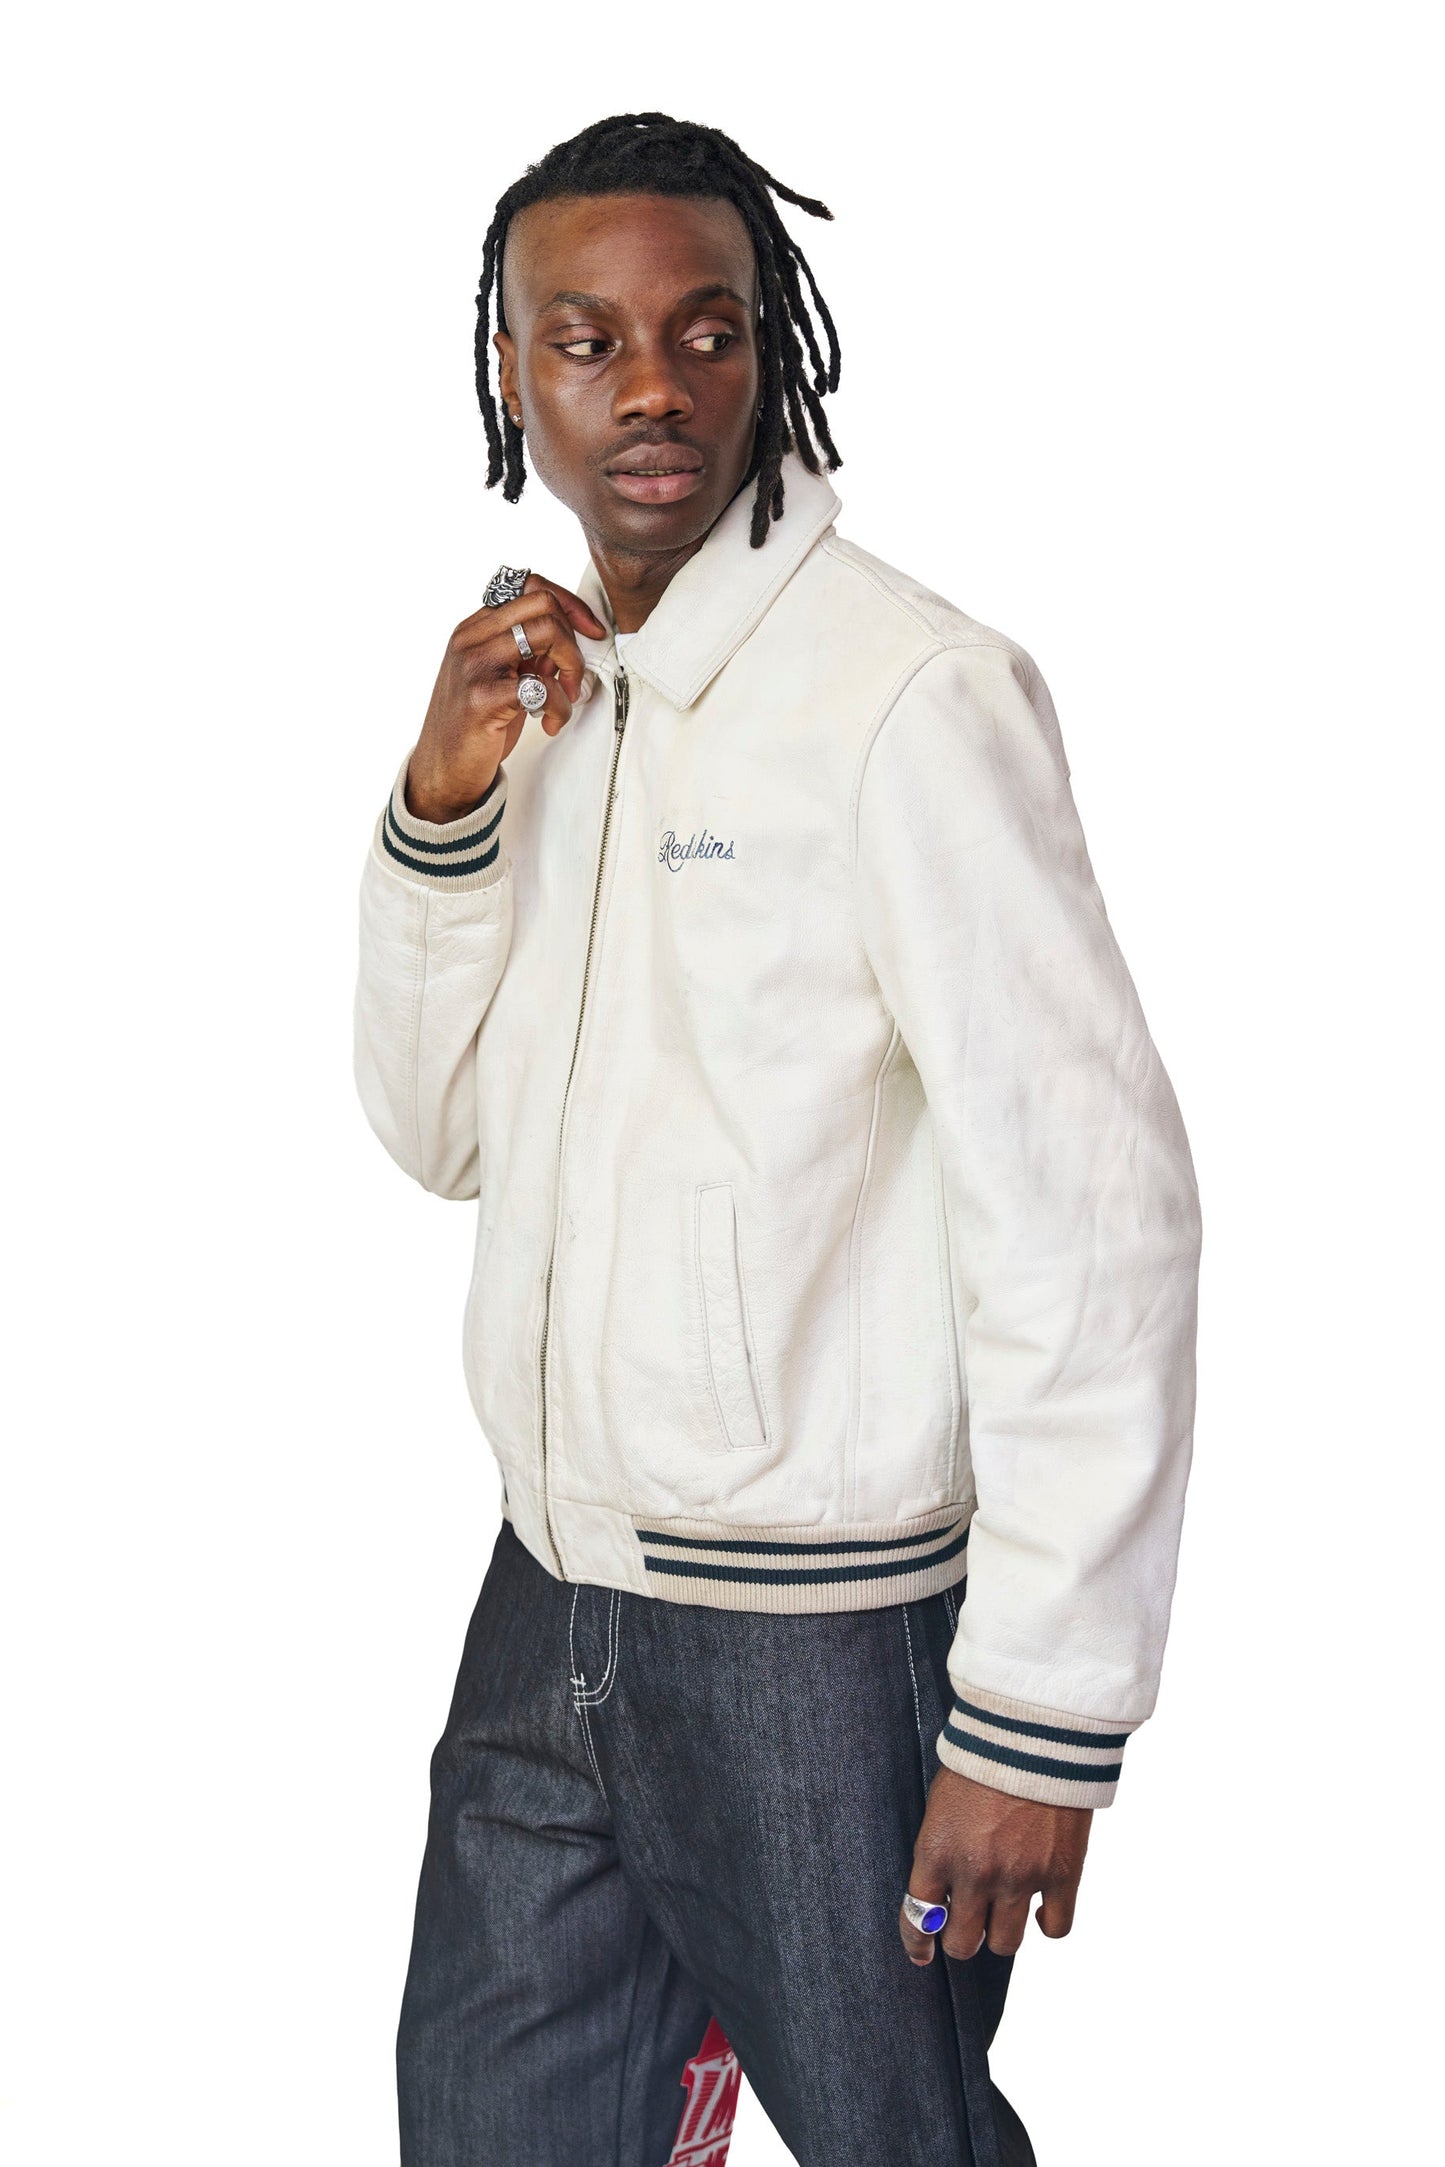 Redskins Distressed Whiteout Leather Jacket